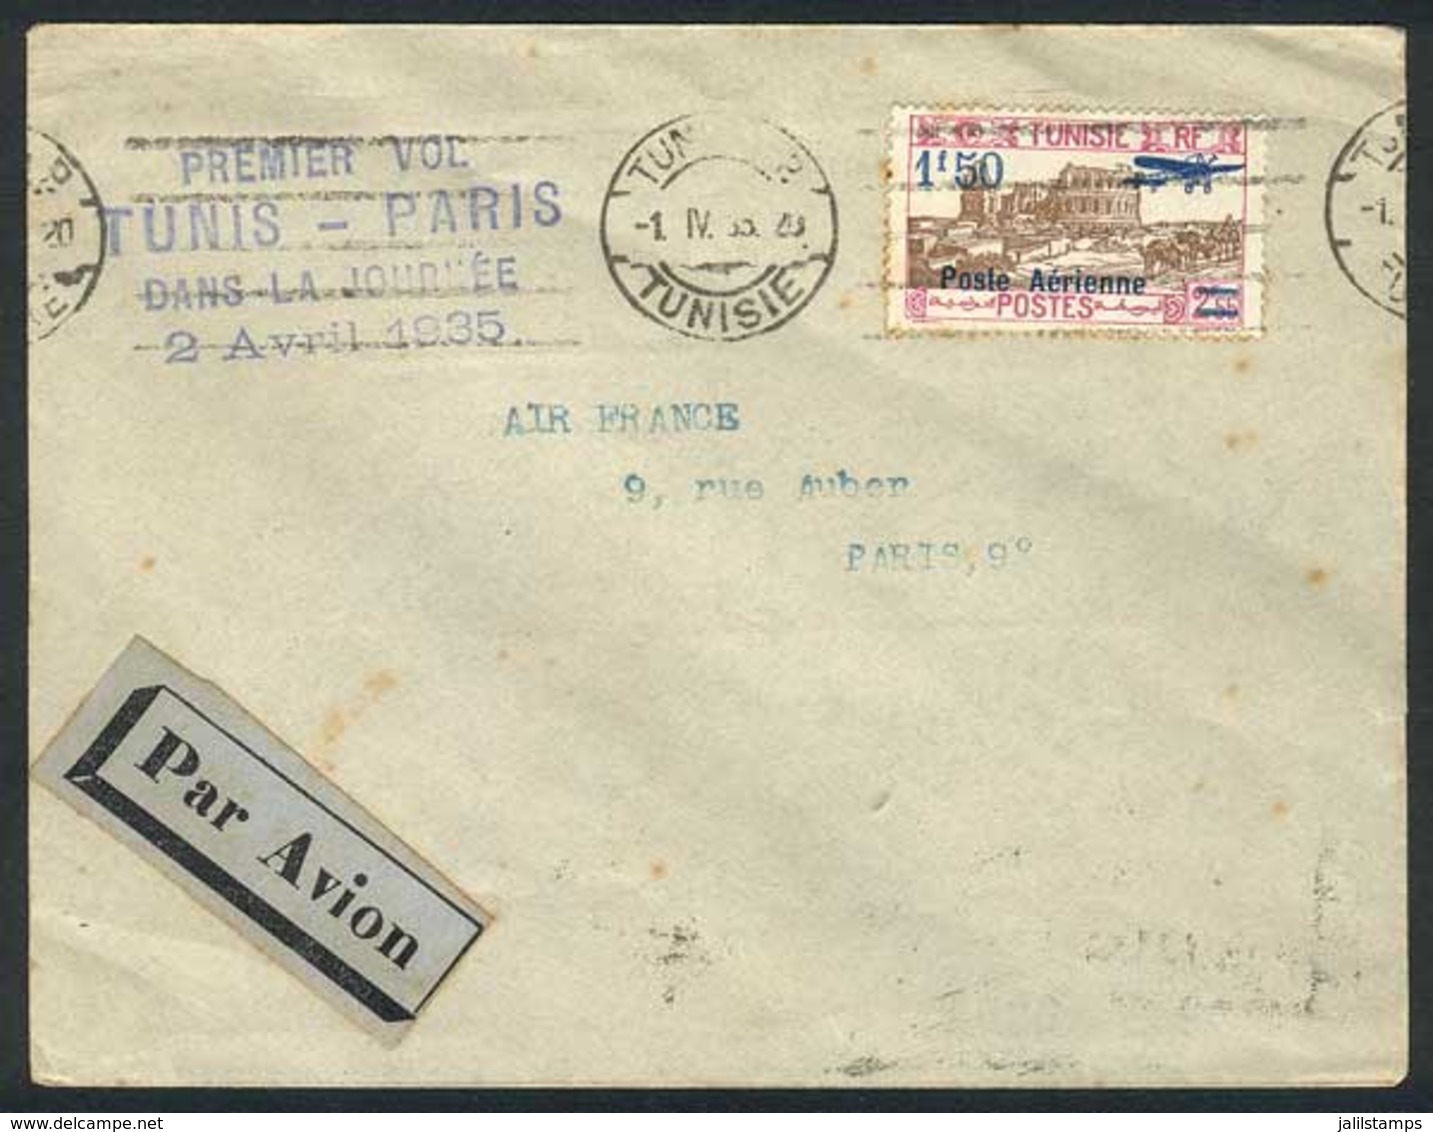 TUNISIA: 2/AP/1935: Cover Flown In The FIRST FLIGHT By Air France Between Tunisia And France, With Paris Arrival Backsta - Tunisia